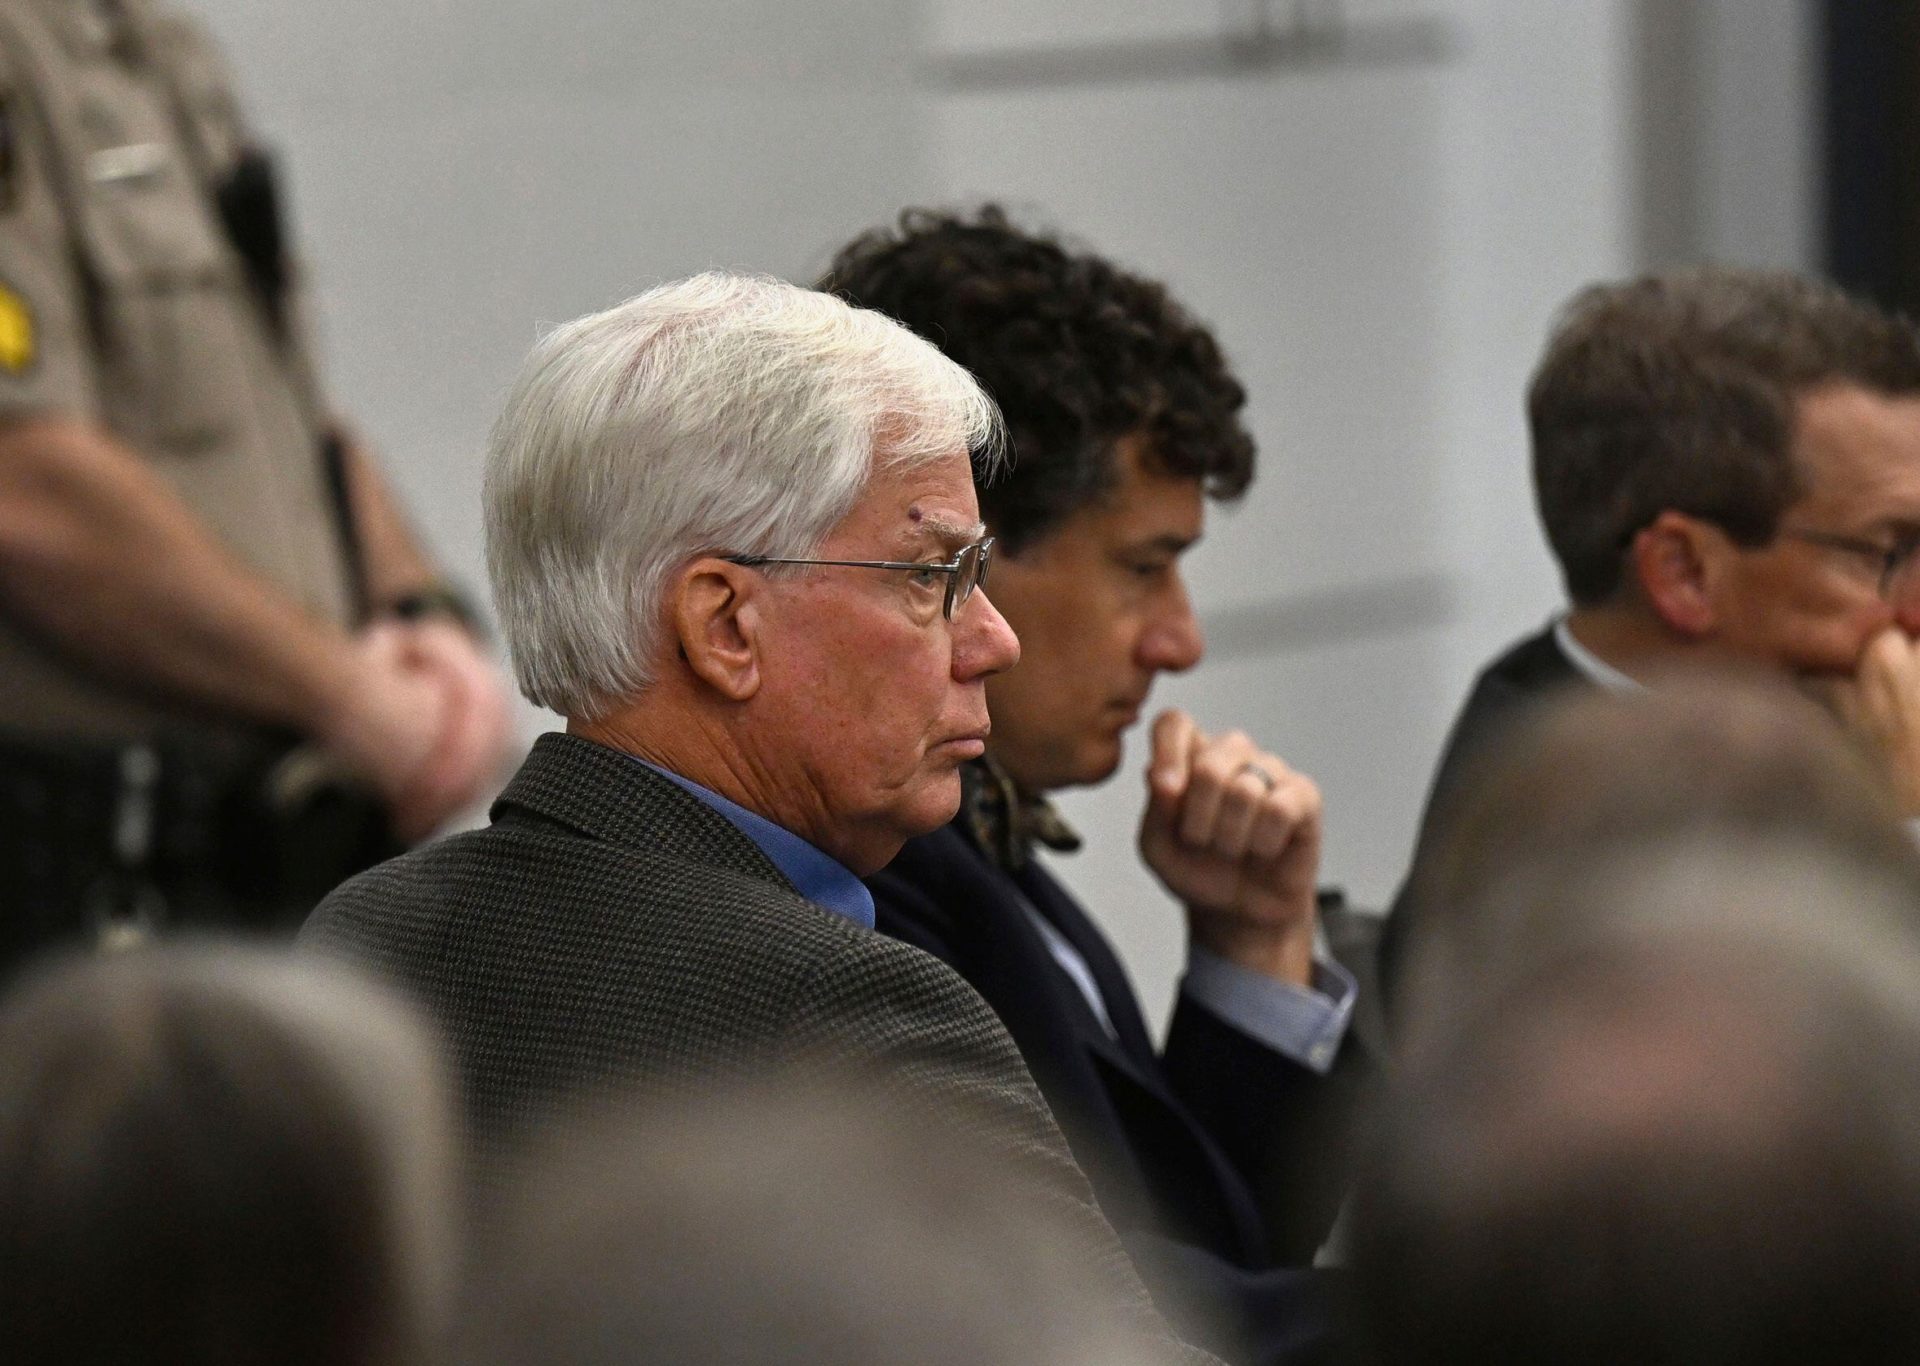 Thomas Martens (left, white hair) sits with attorneys during a hearing on Monday, October 30th 2023, for Martens and his daughter, Molly Corbett, in the 2015 death of Molly's husband, Jason Corbett at the Davidson County Courthouse in Lexington, North Carolina